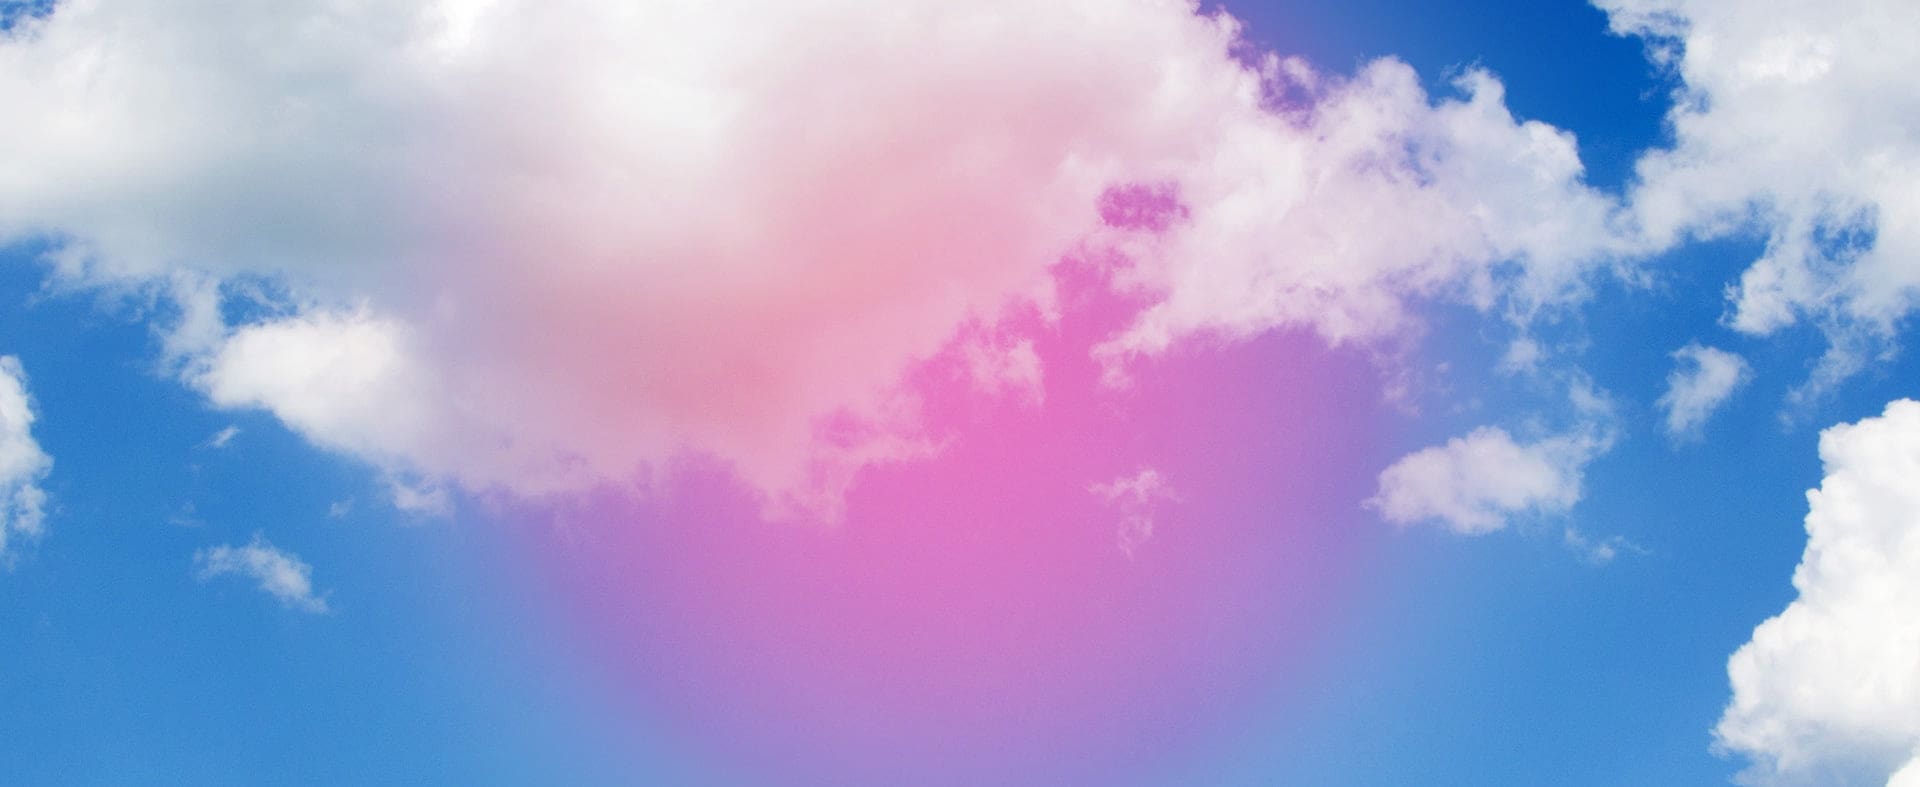 Blue and pink clouds background.